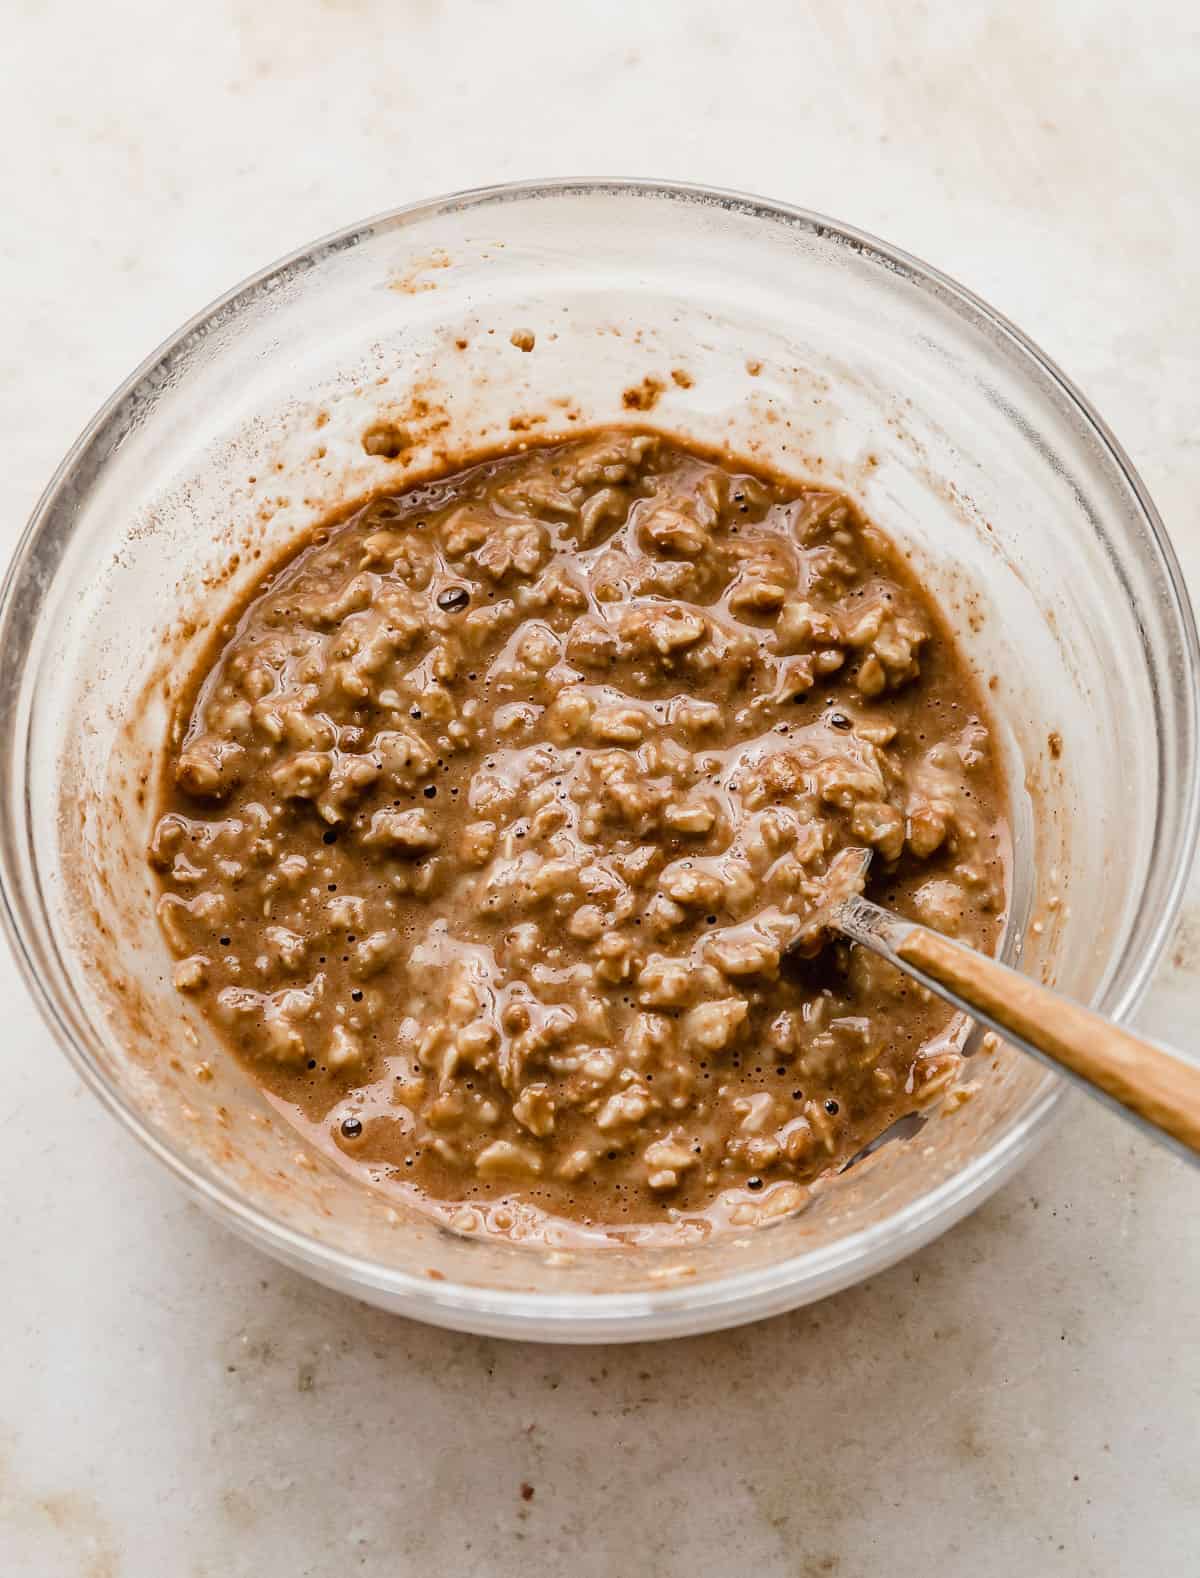 Chocolate Peanut Butter Protein Oatmeal in a glass bowl on a cream colored marble background.